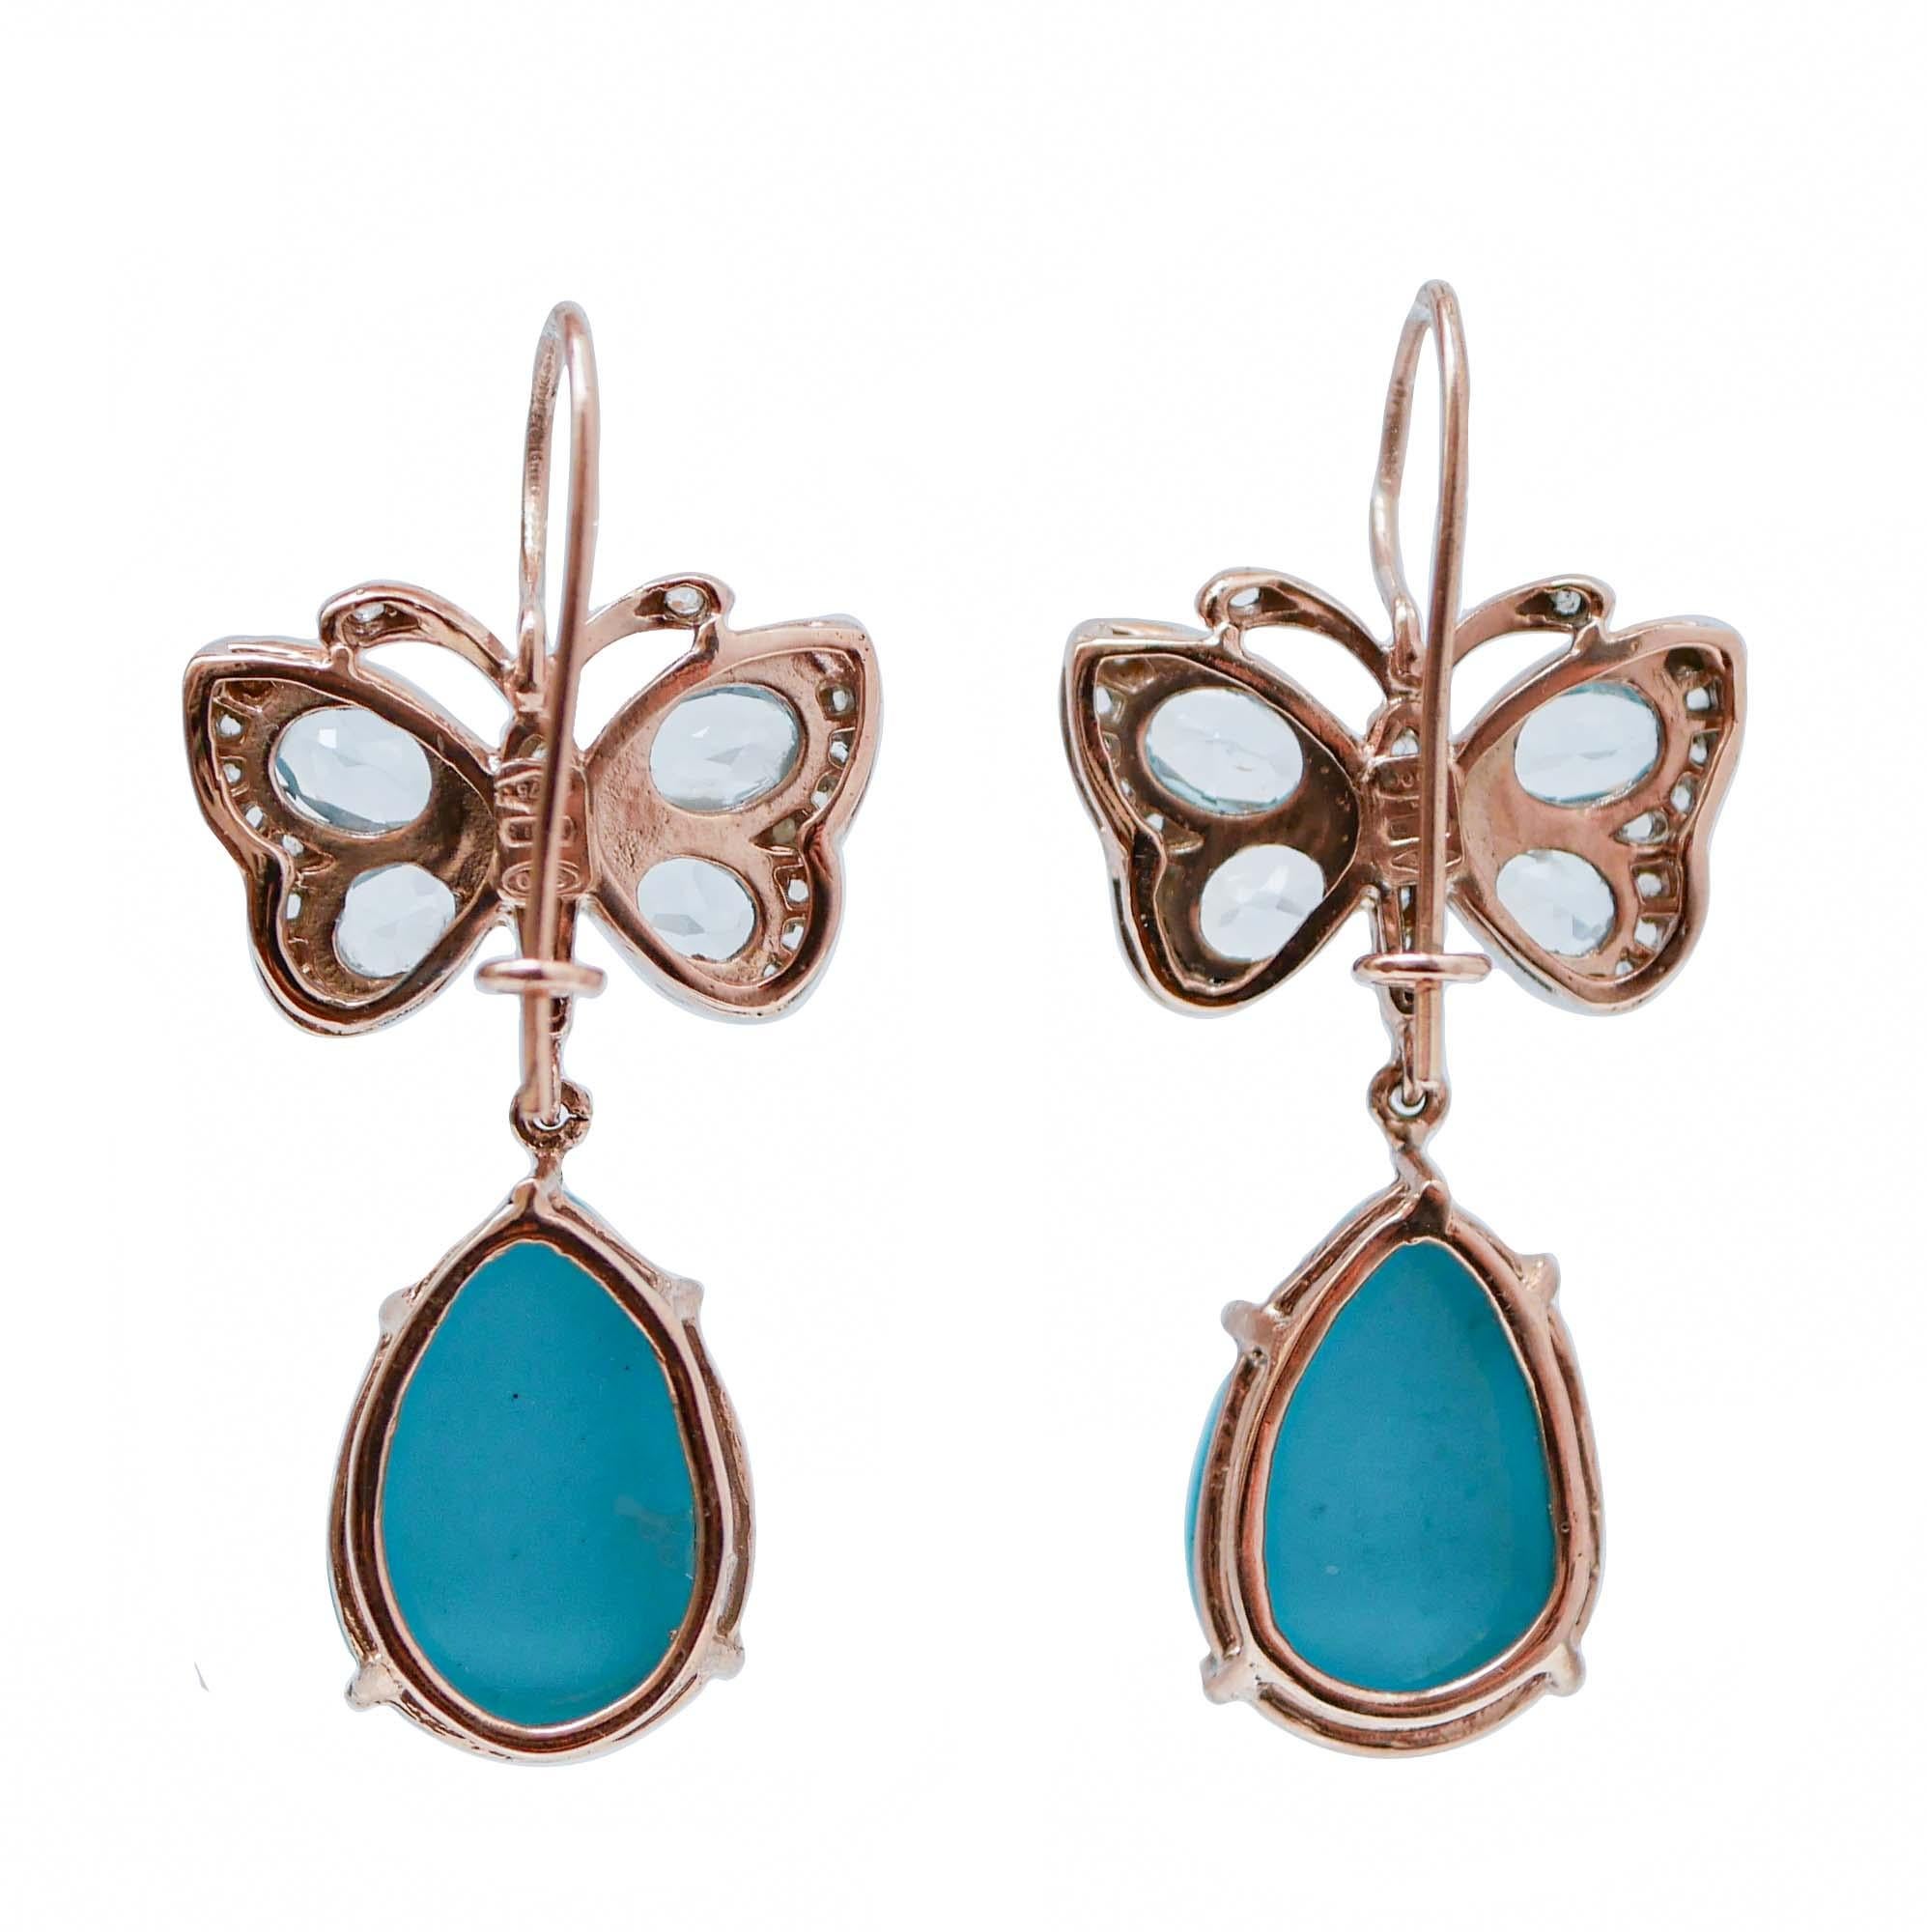 Retro Turquoise, Topazs, Diamonds, Rose Gold and Silver Dangle Earrings.